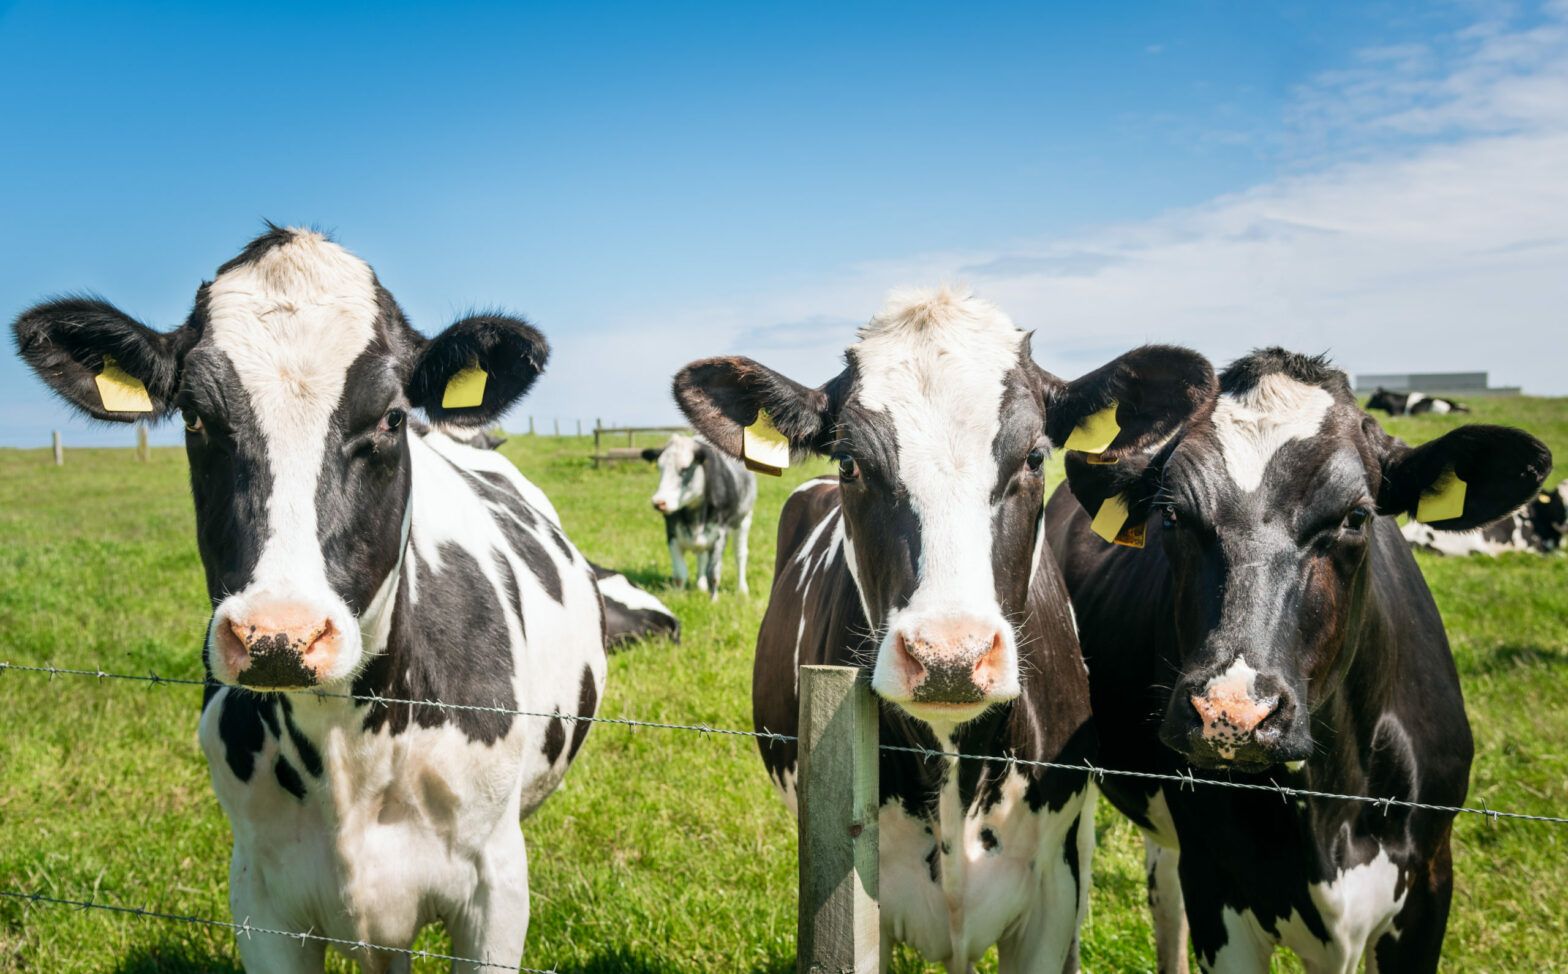 UK sustainable farming move welcomed by investment industry